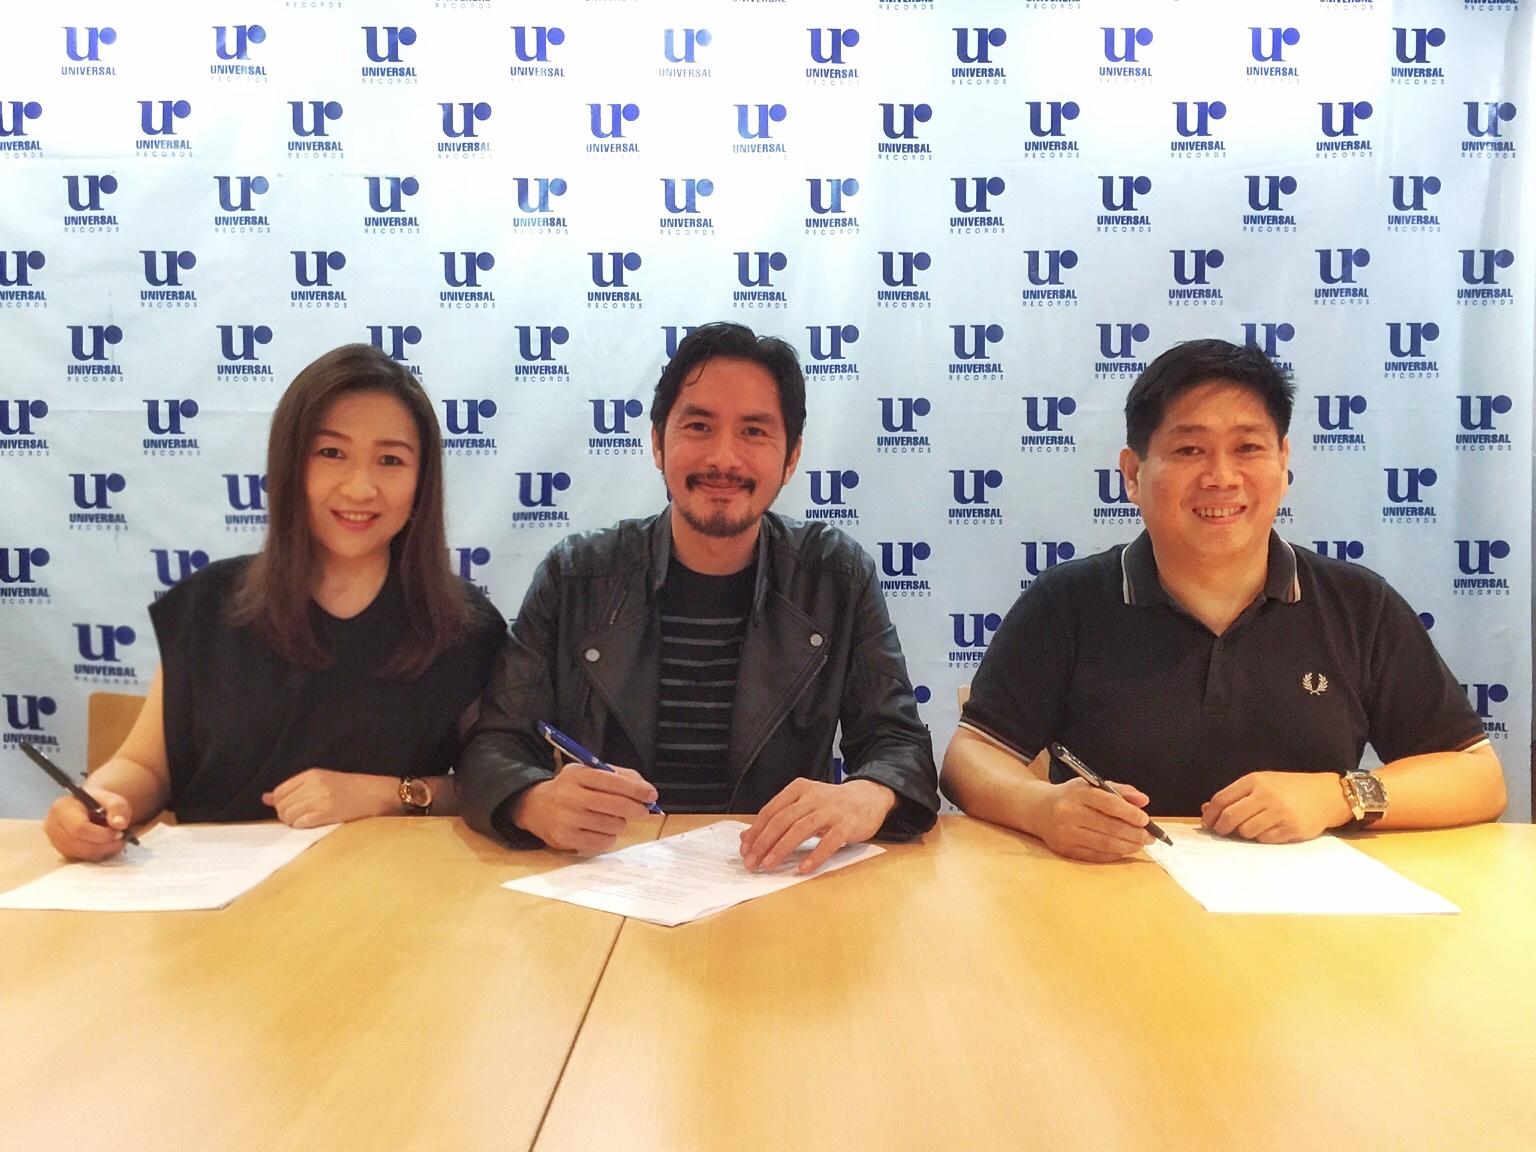 Universal Records General Manager Kathleen Dy-Go, Rico Blanco and Universal Records Operations Manager Peter Chan